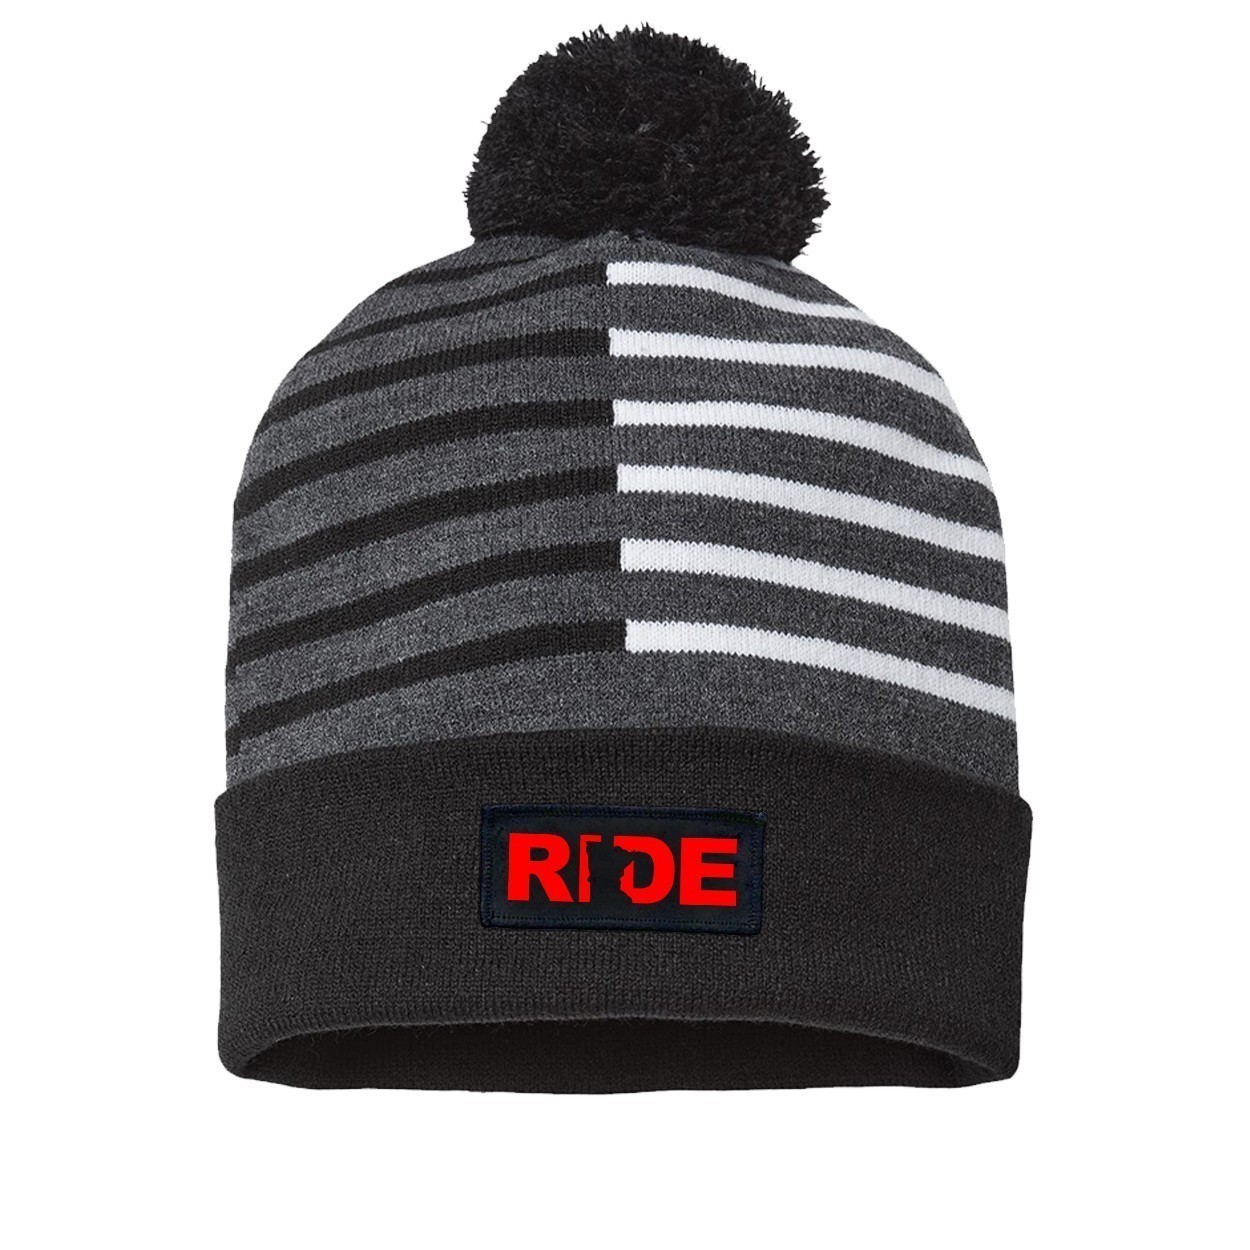 Ride Minnesota Night Out Woven Patch Roll Up Pom Knit Beanie Half Color Black/White (Red Logo)